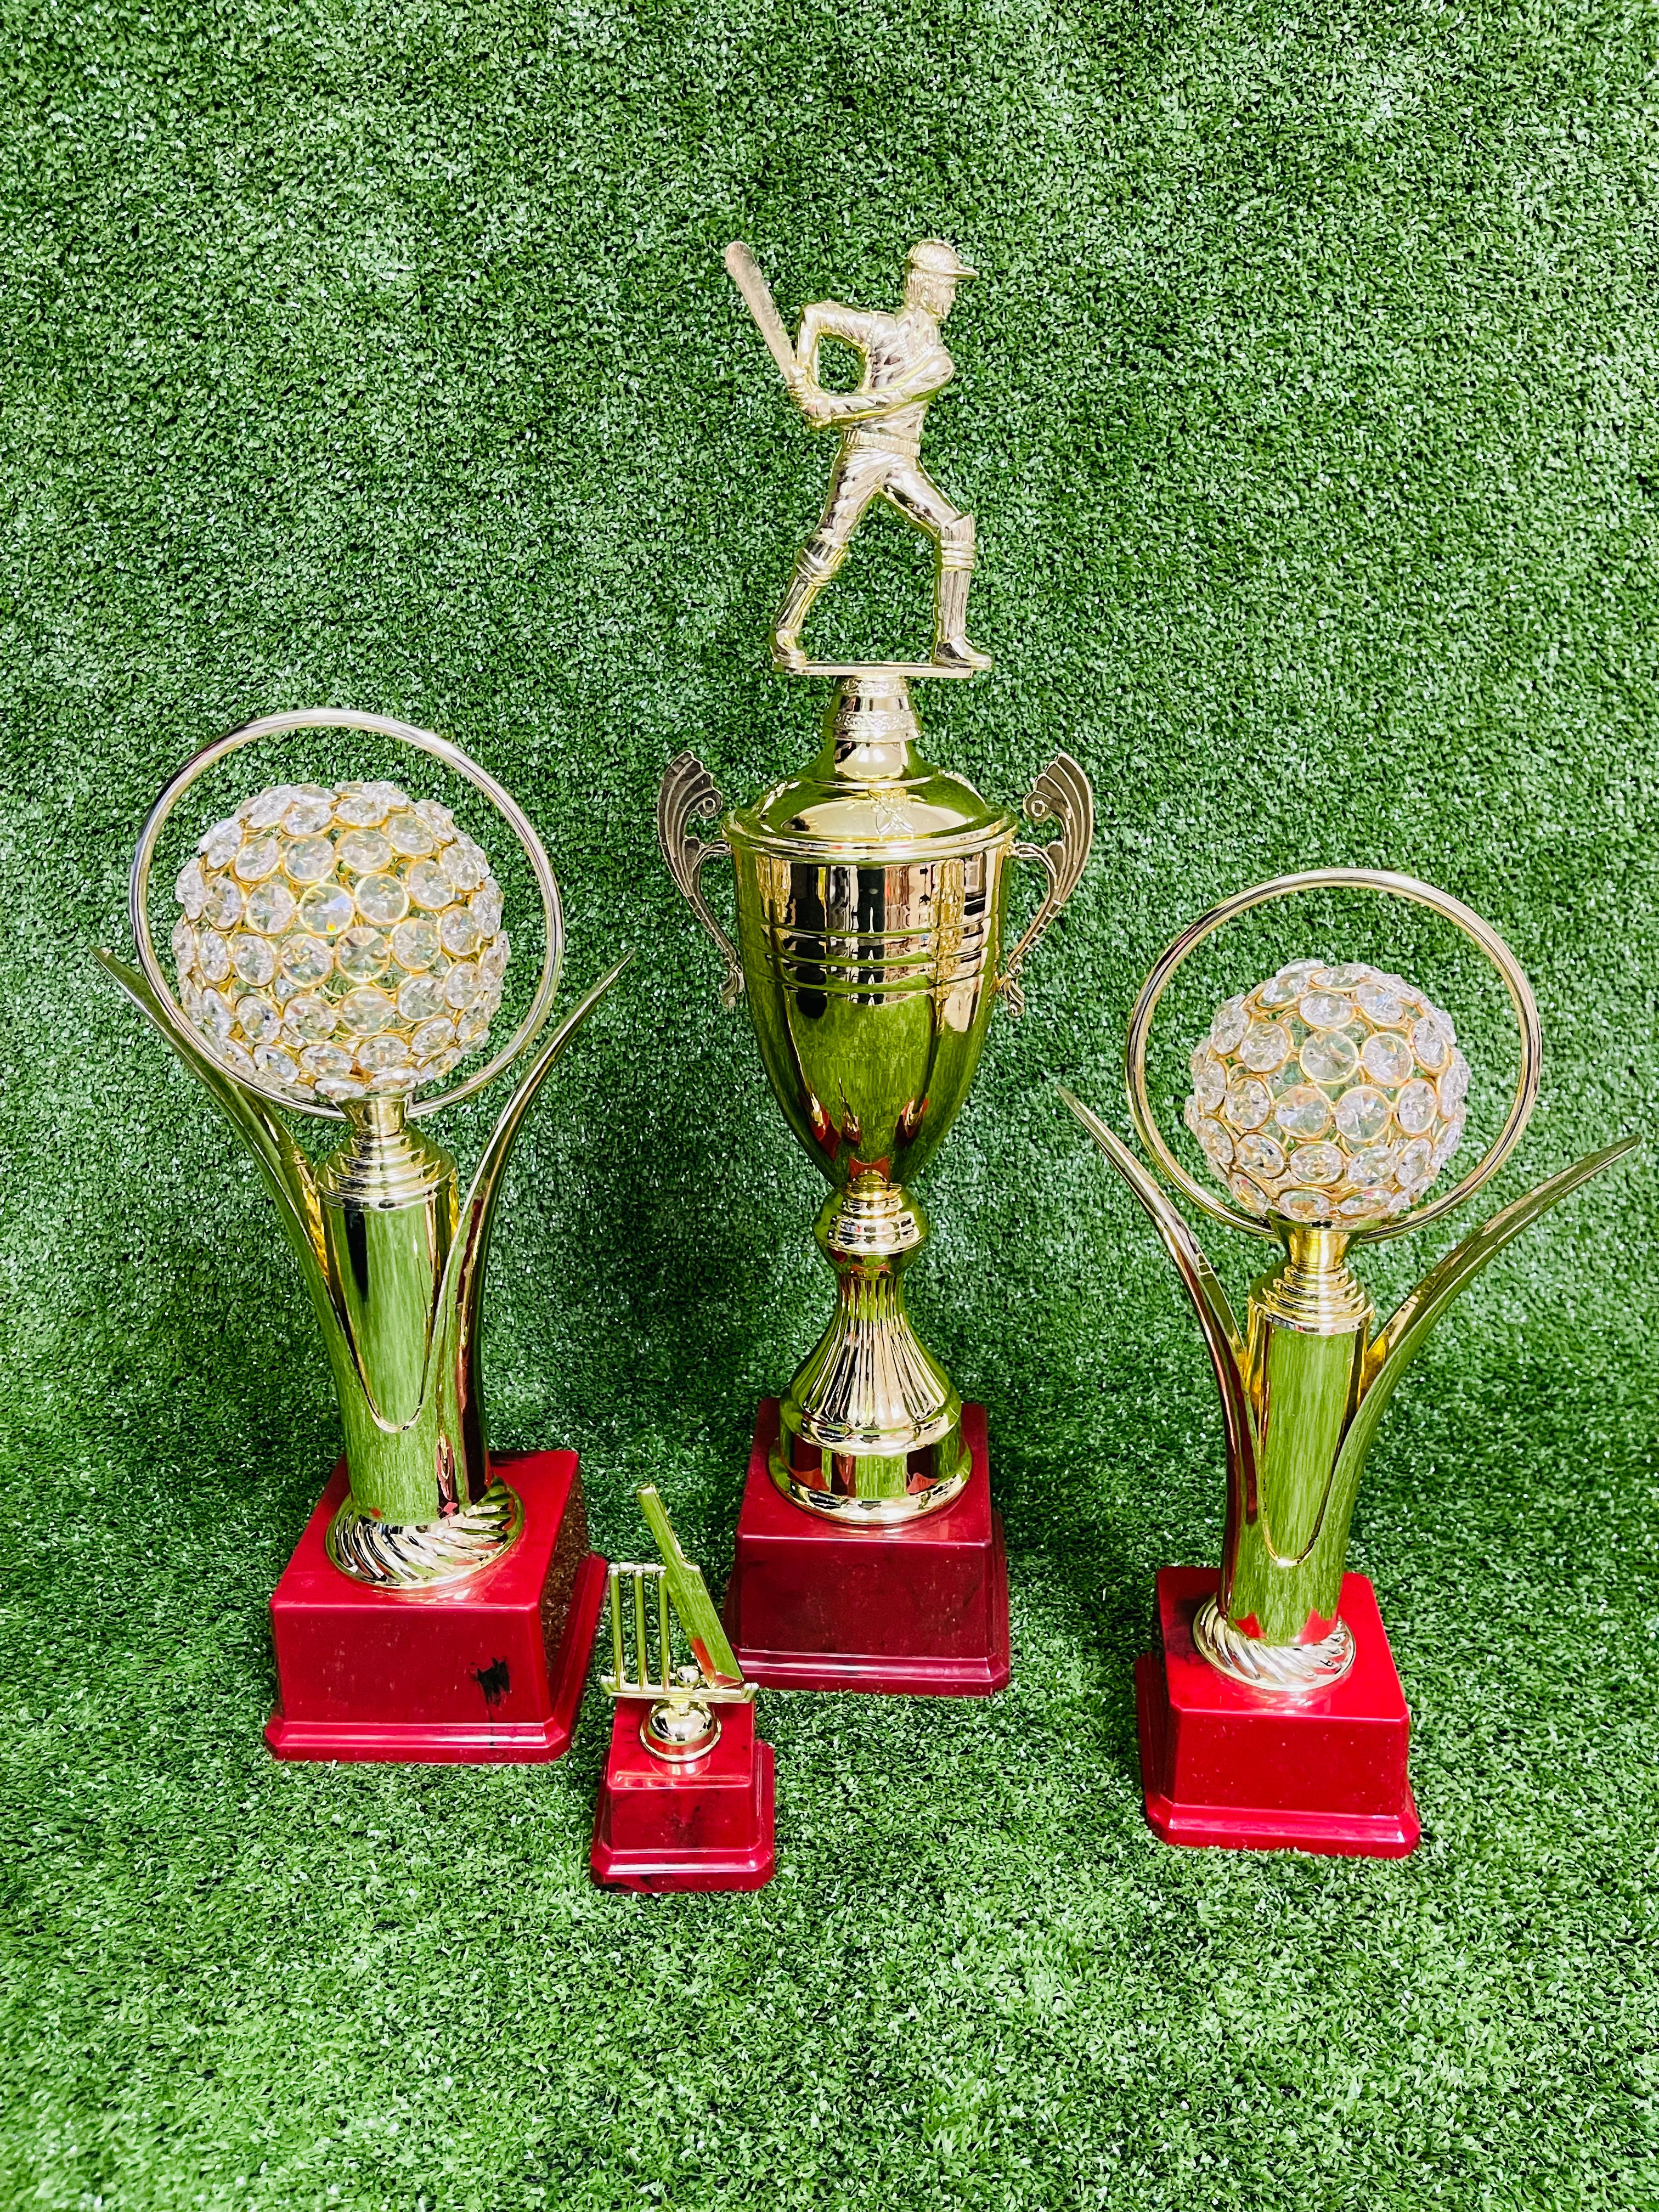 Raydn Cricket Trophy With Globe(15 inches height)